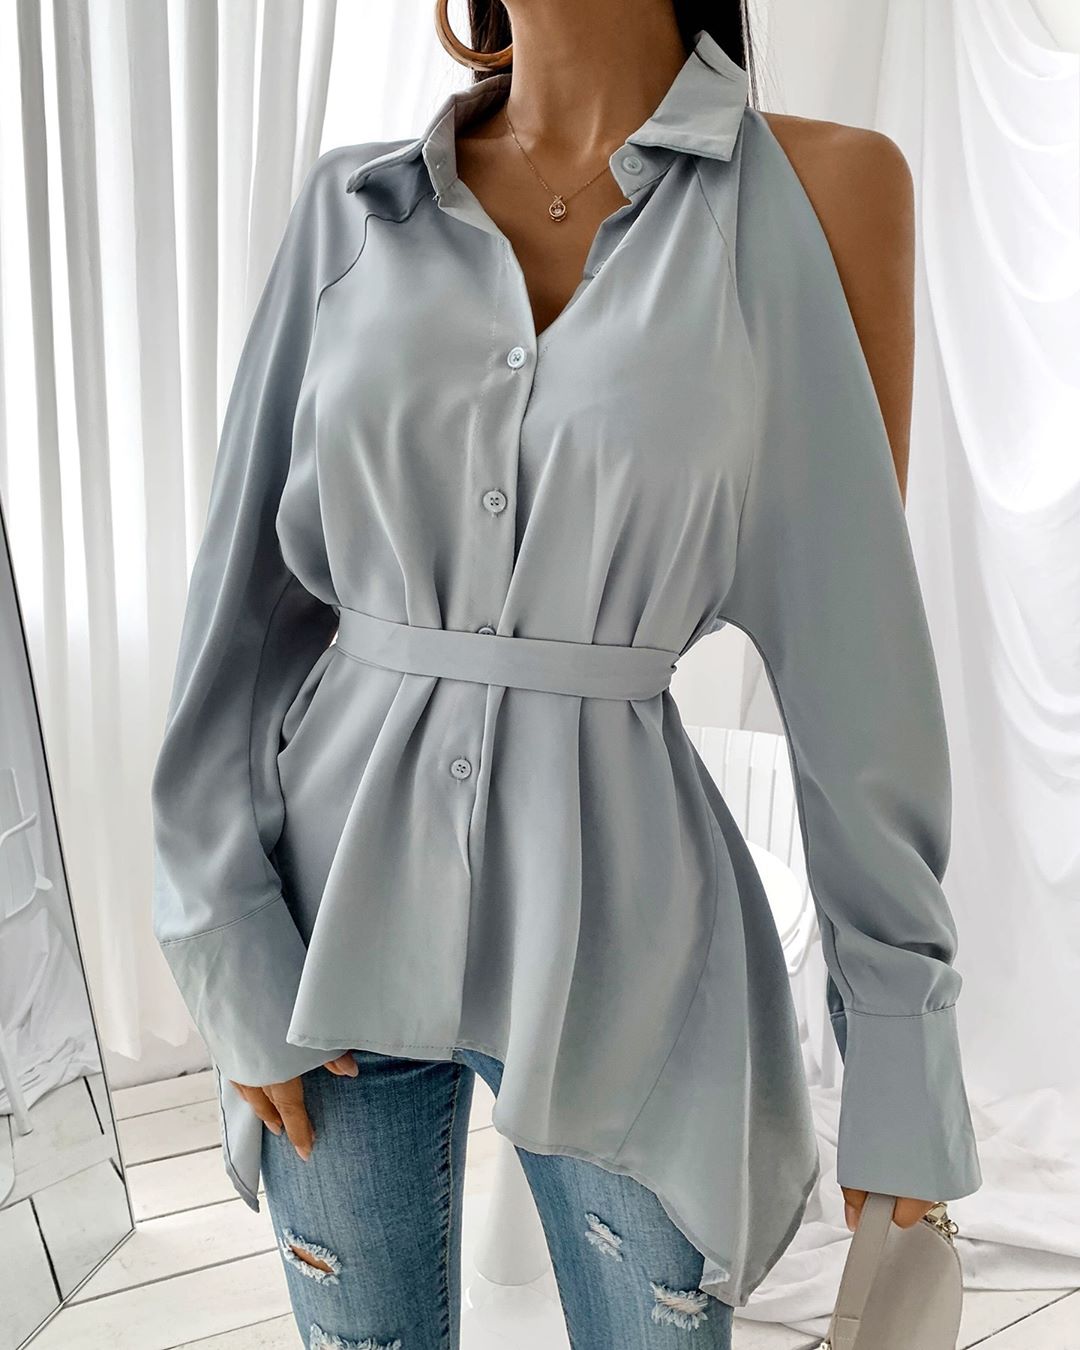 Chic Me - Top off your fit⁠
🔍"LZD1856"⁠
Shop: ChicMe.com⁠
⁠
#chicmeofficial #fashion #lovecurves #ootd #style #chic #fashionmoment